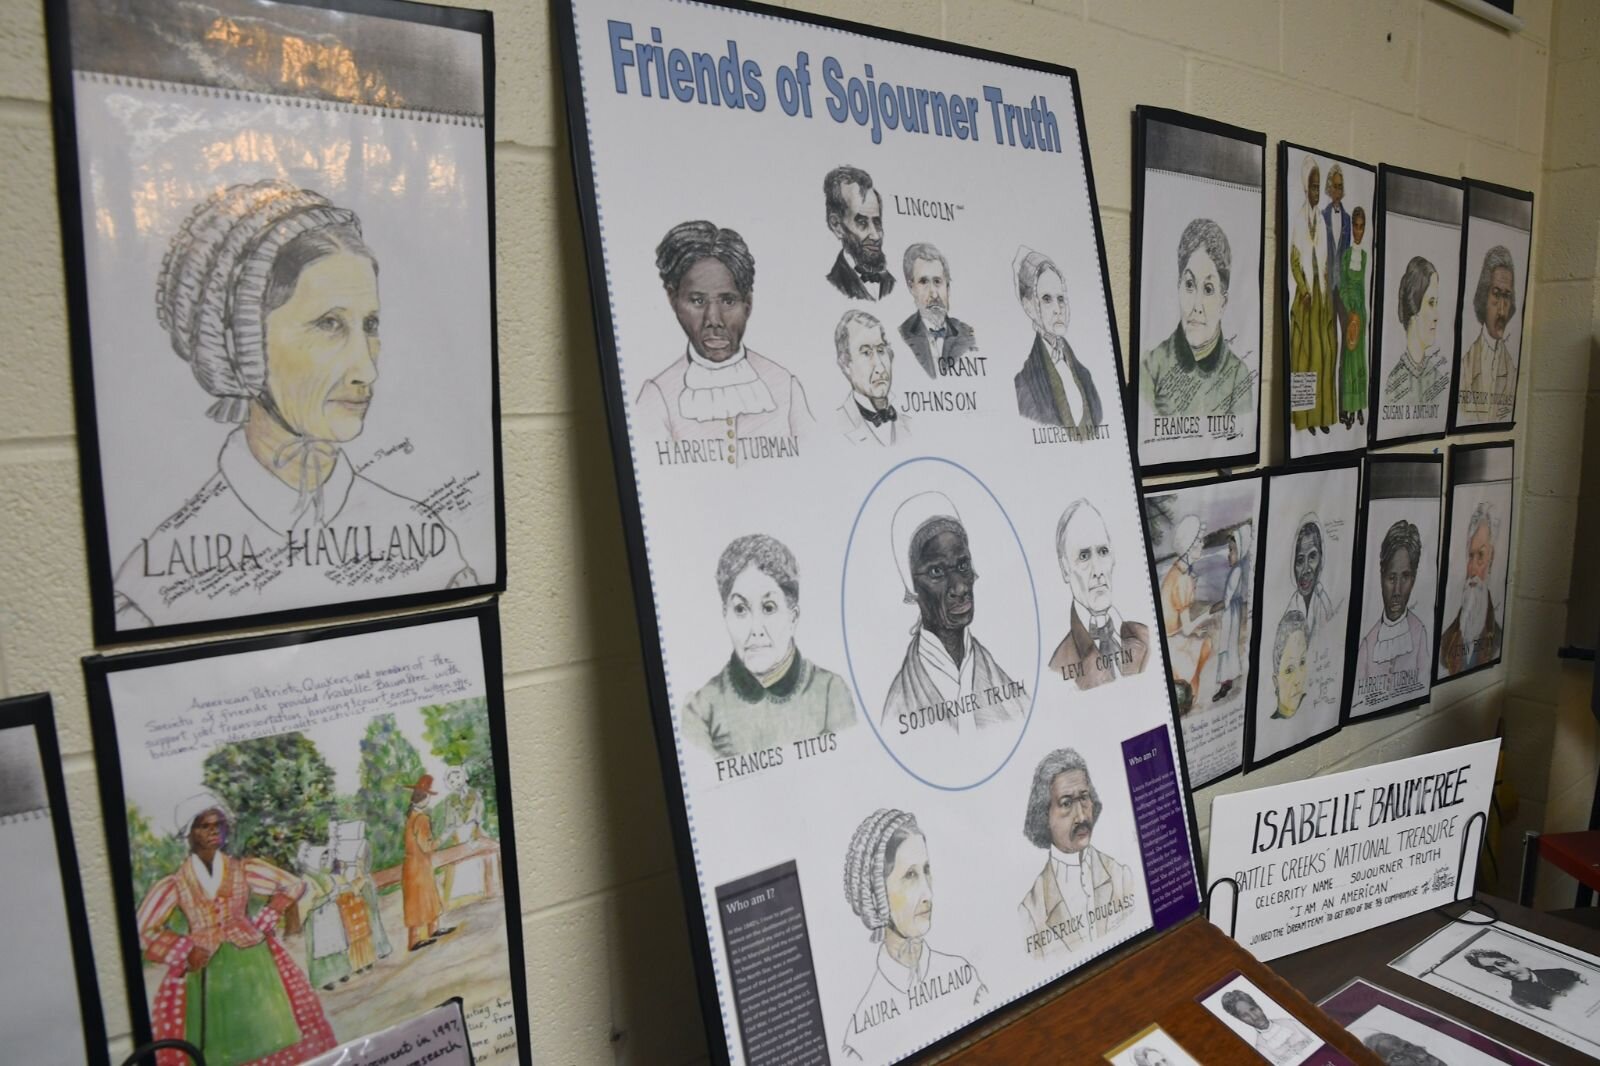 The Battle Creek Regional History Museum has several items on loan from the Sojourner Truth Institute.